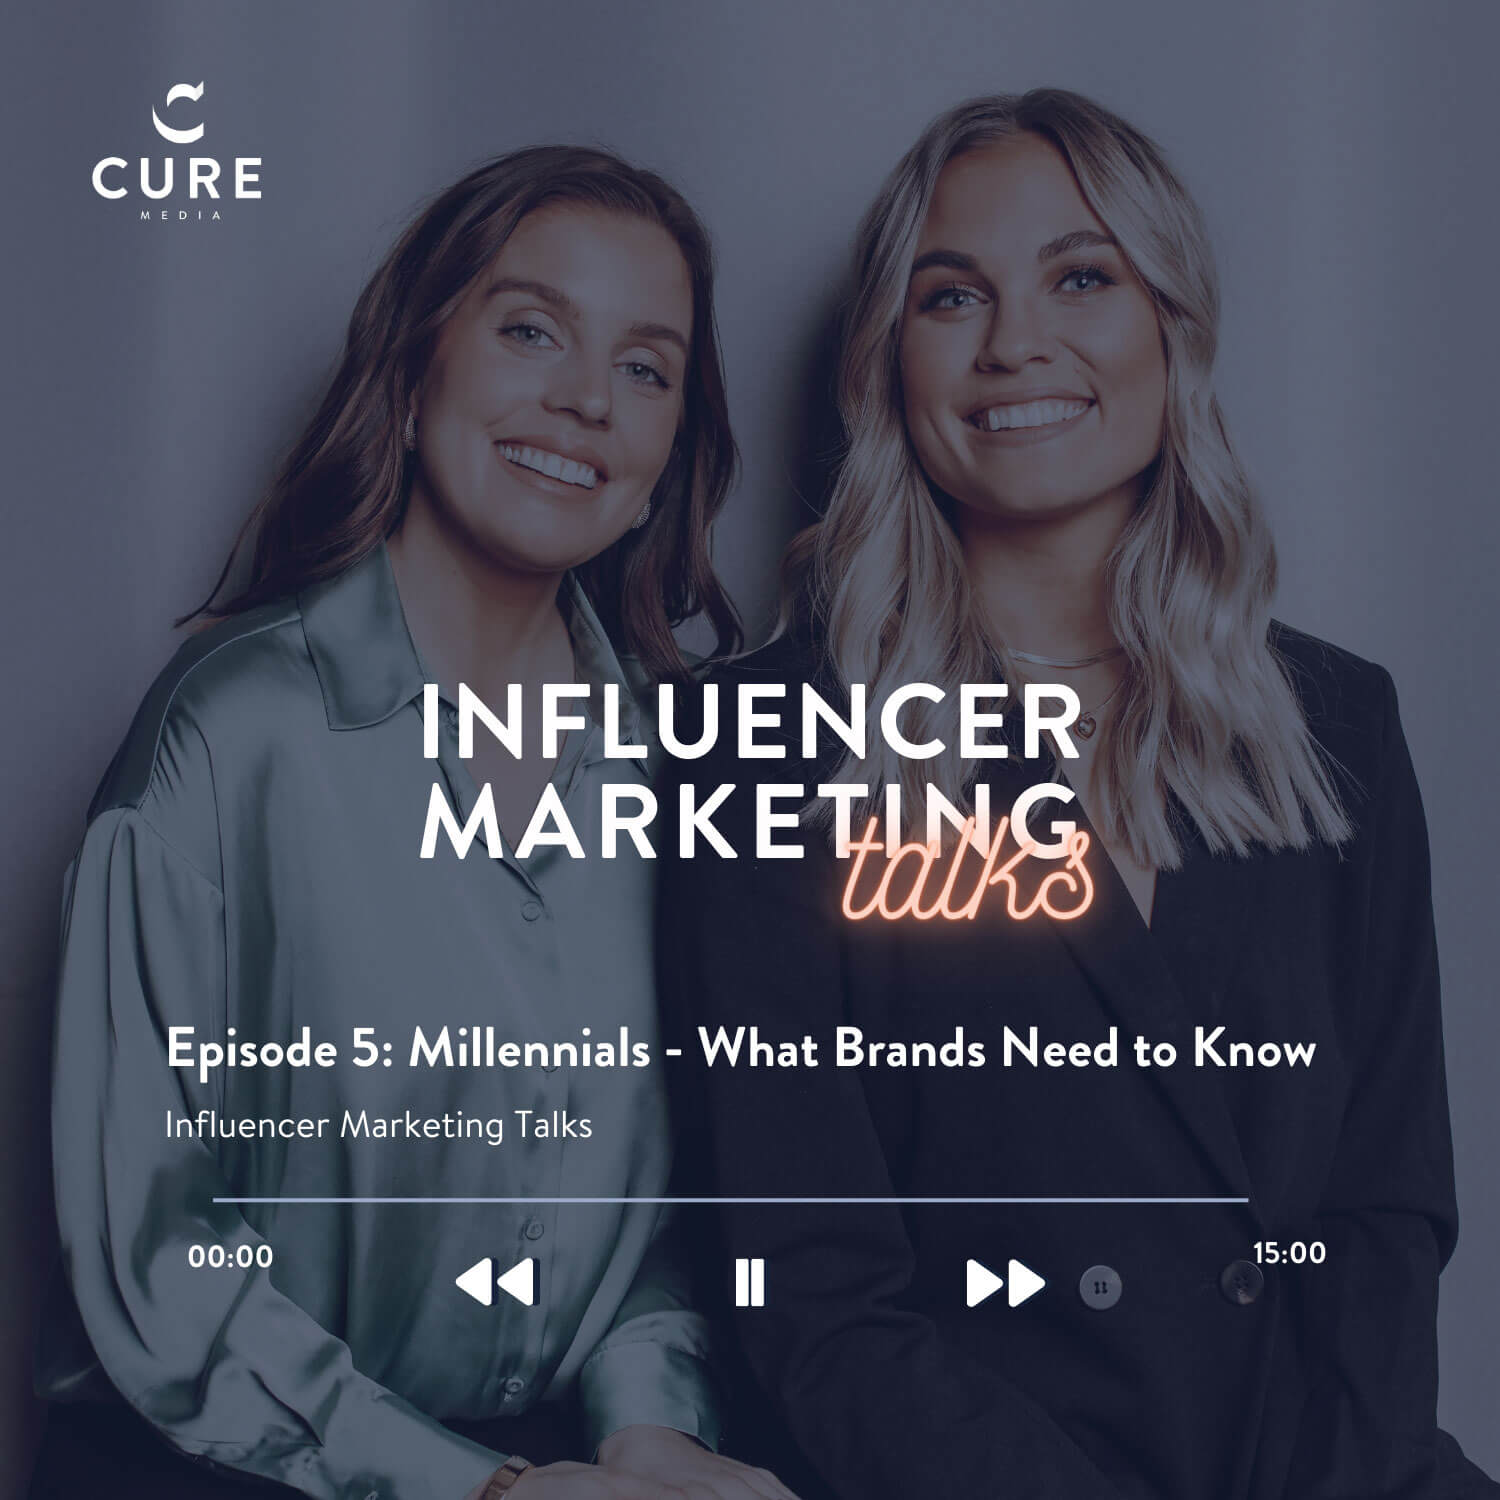 E05 - Millennials - What brands need to know